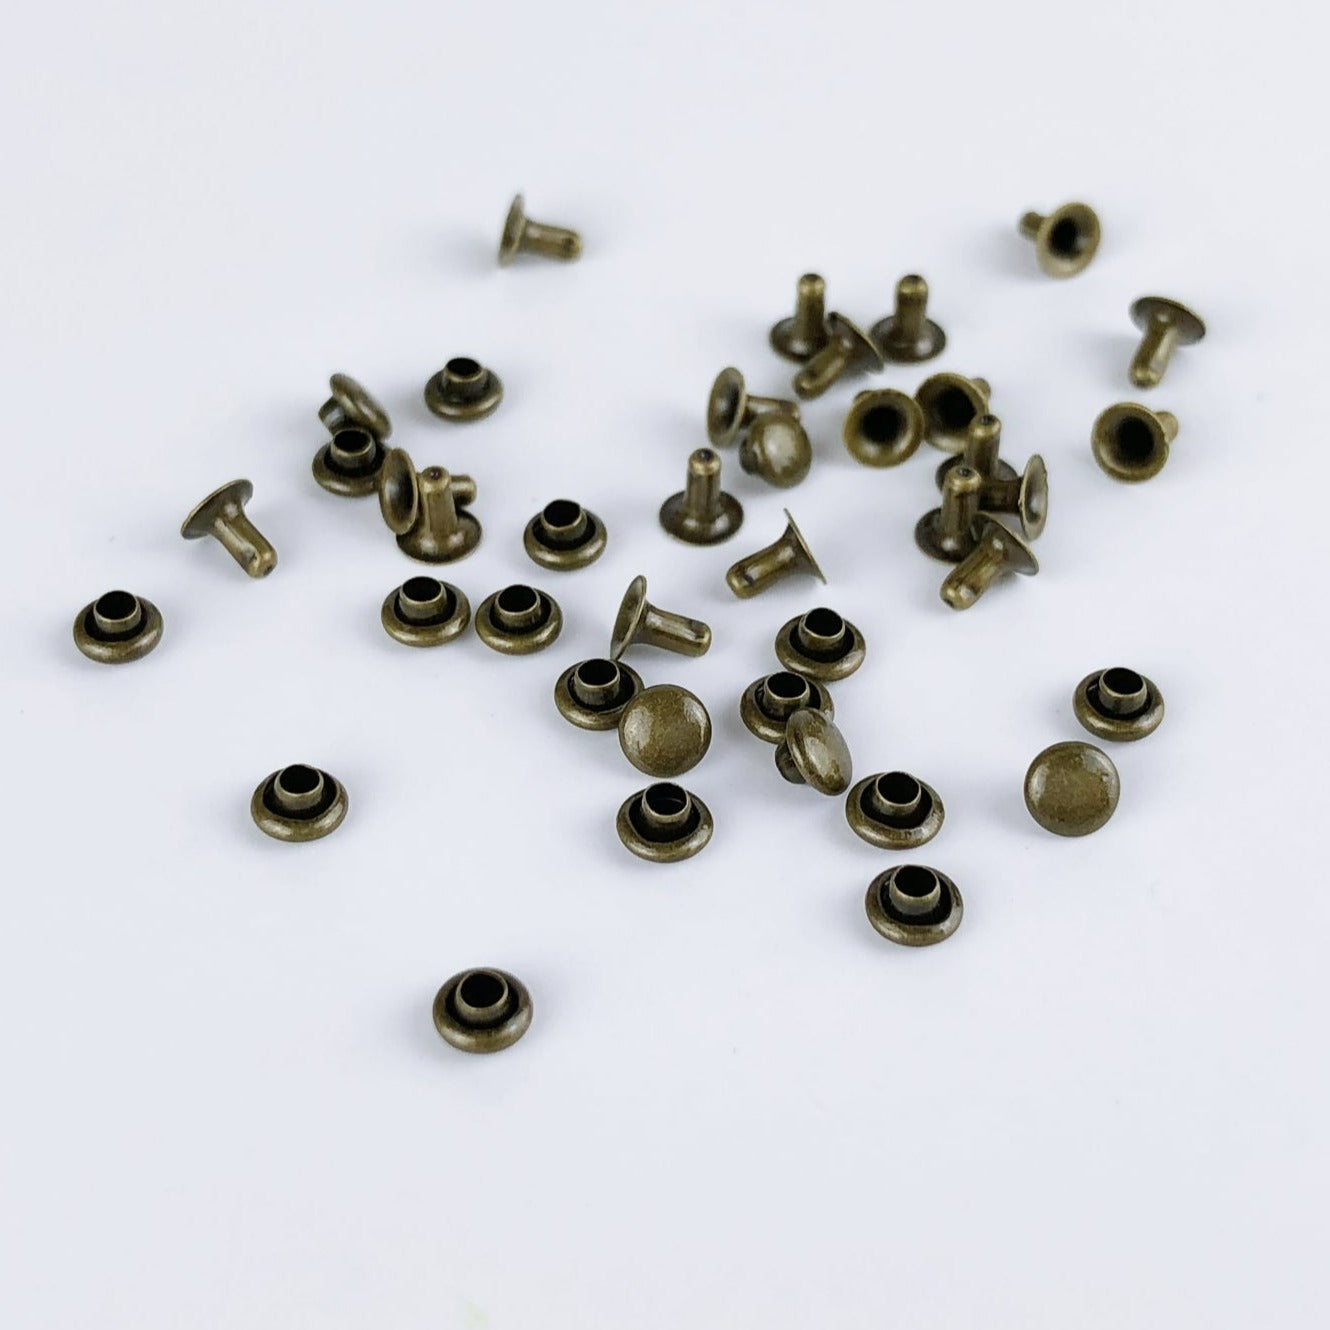 9mm Rivet (Without Apparatus) 33.5 Single Rivet (in packages of 100 or 1000 pieces)